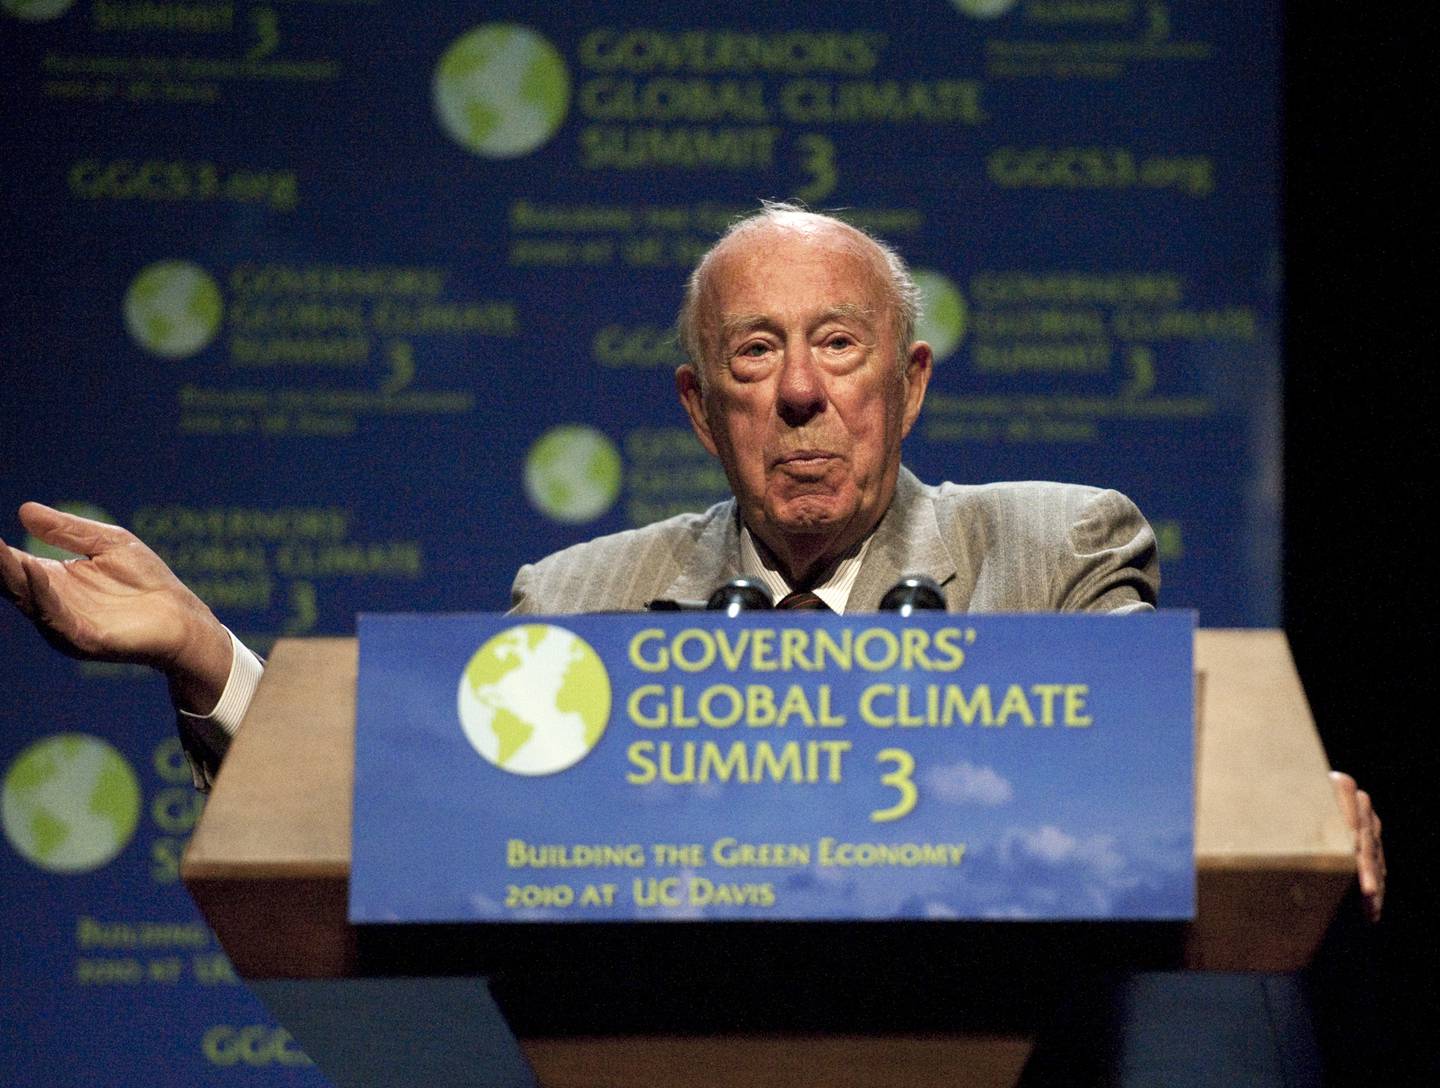 In this Nov. 15, 2010, file photo, former Secretary of State George Shultz speaks at University of California Davis during the Governors' Global Climate Summit 3: Building the Green Economy, in Sacramento, Calif.